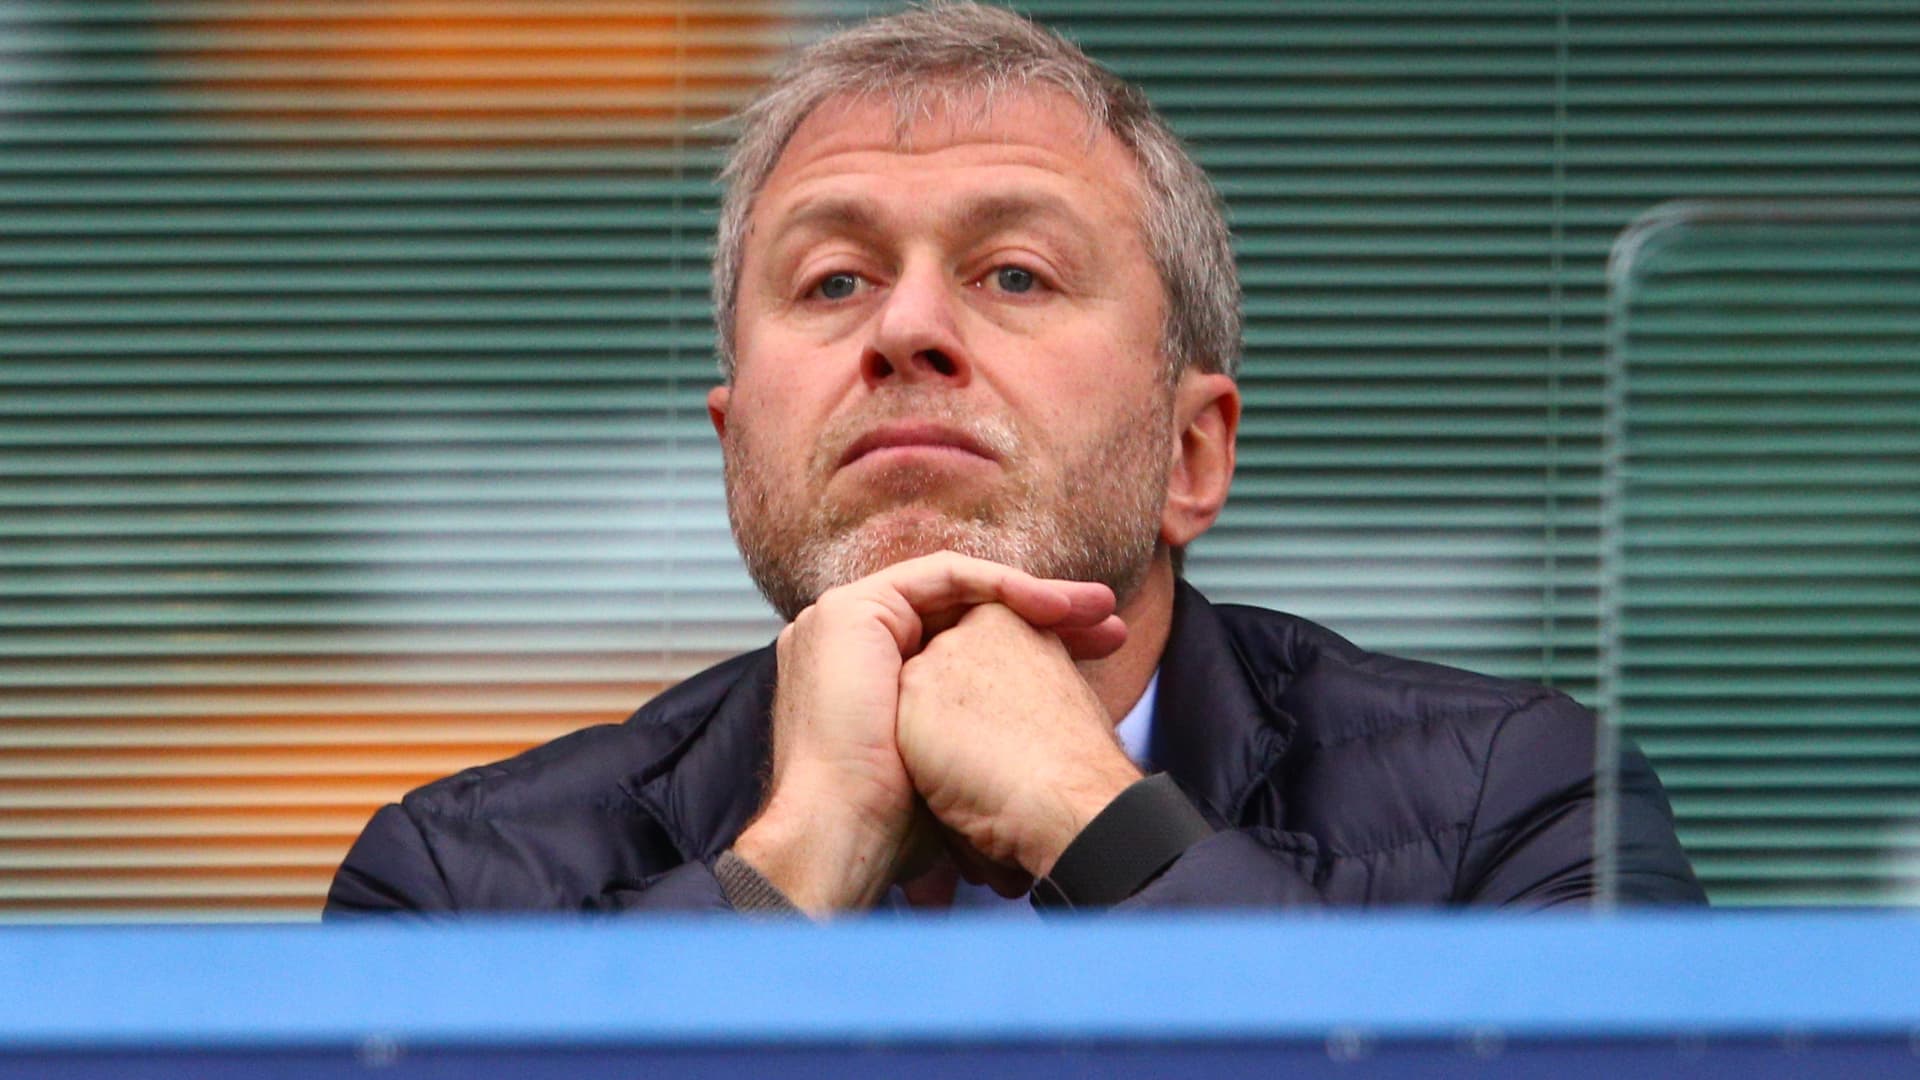 Venture capital fund backed by Russian oligarch Abramovich removes all traces of operations online